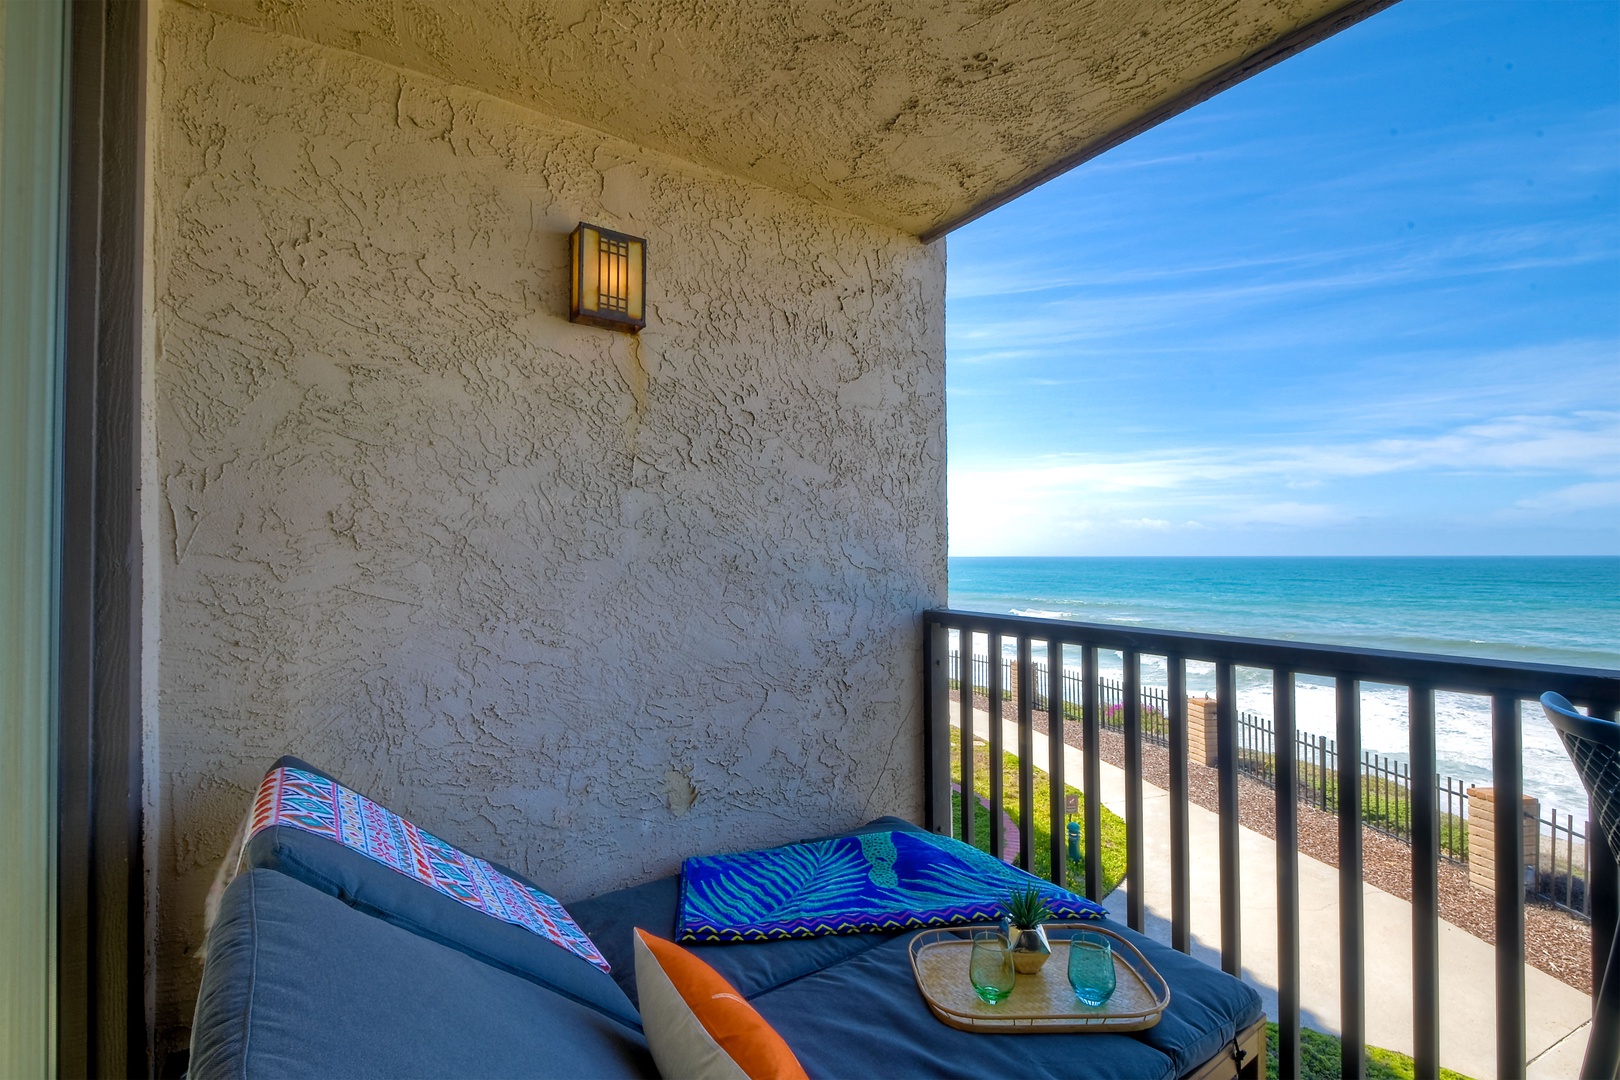 Lounge the day away or dine alfresco with ocean views on the balcony